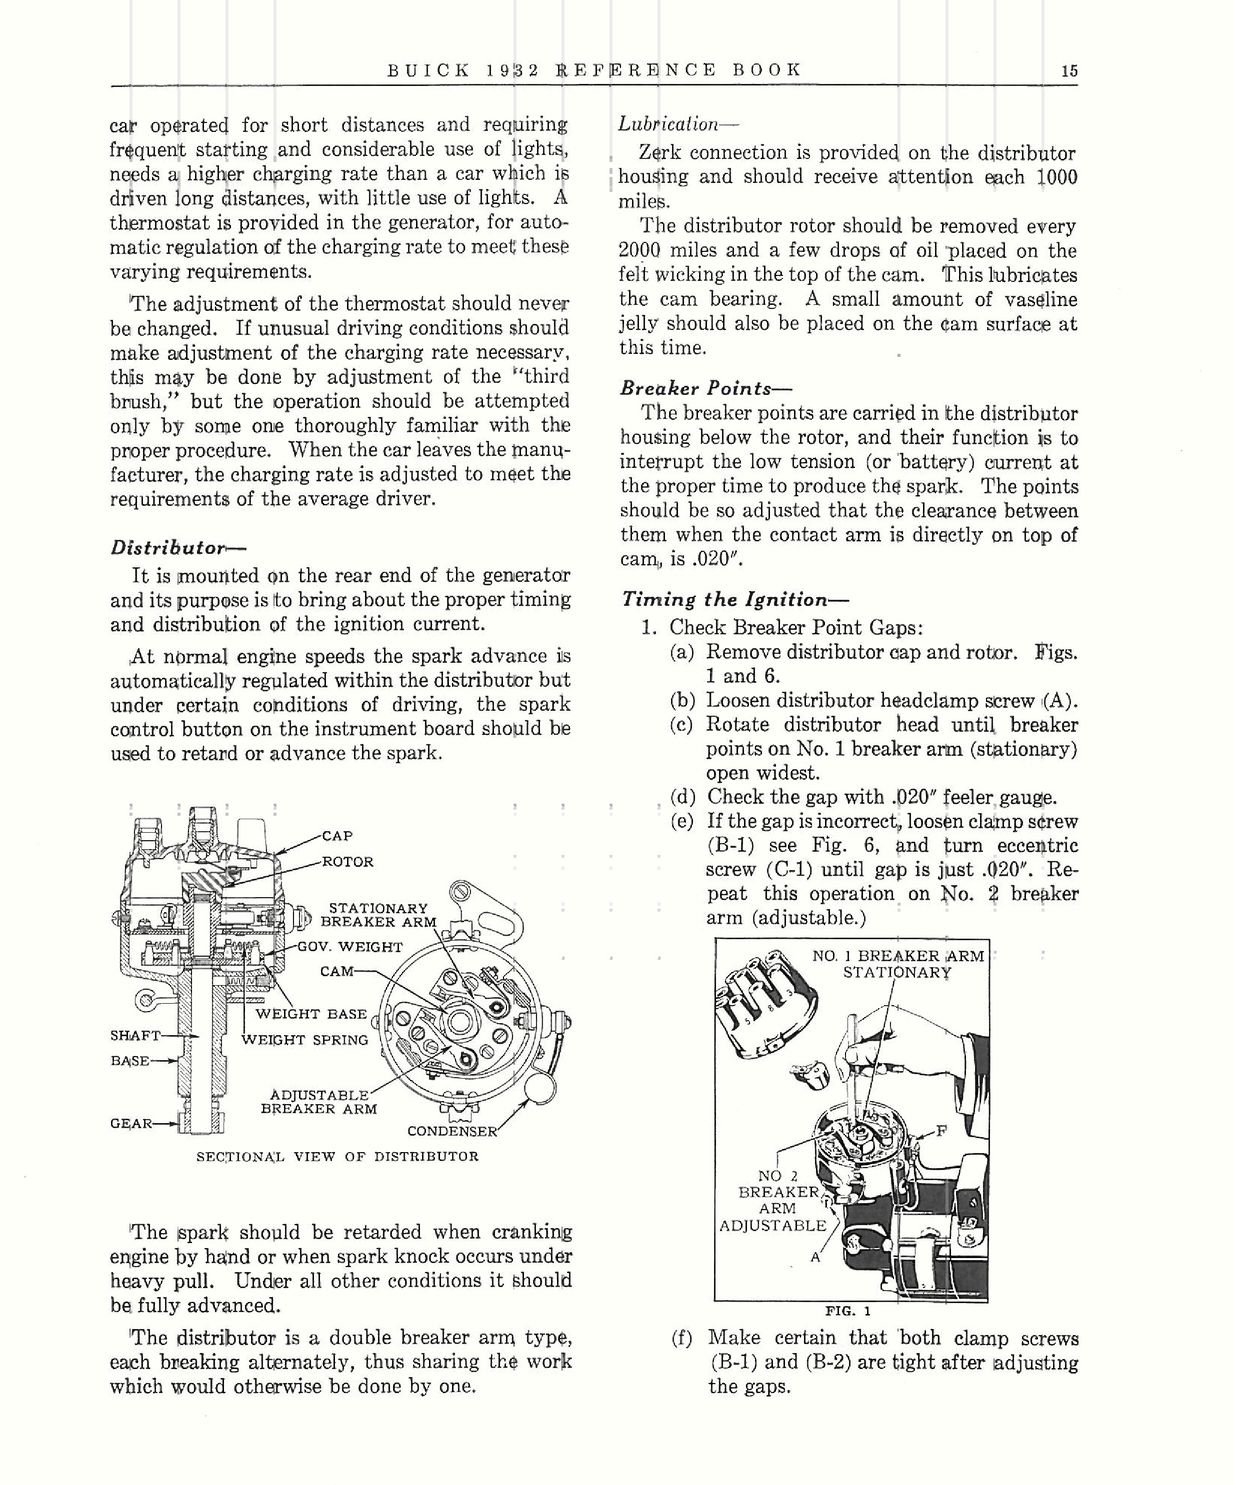 n_1932 Buick Reference Book-15.jpg